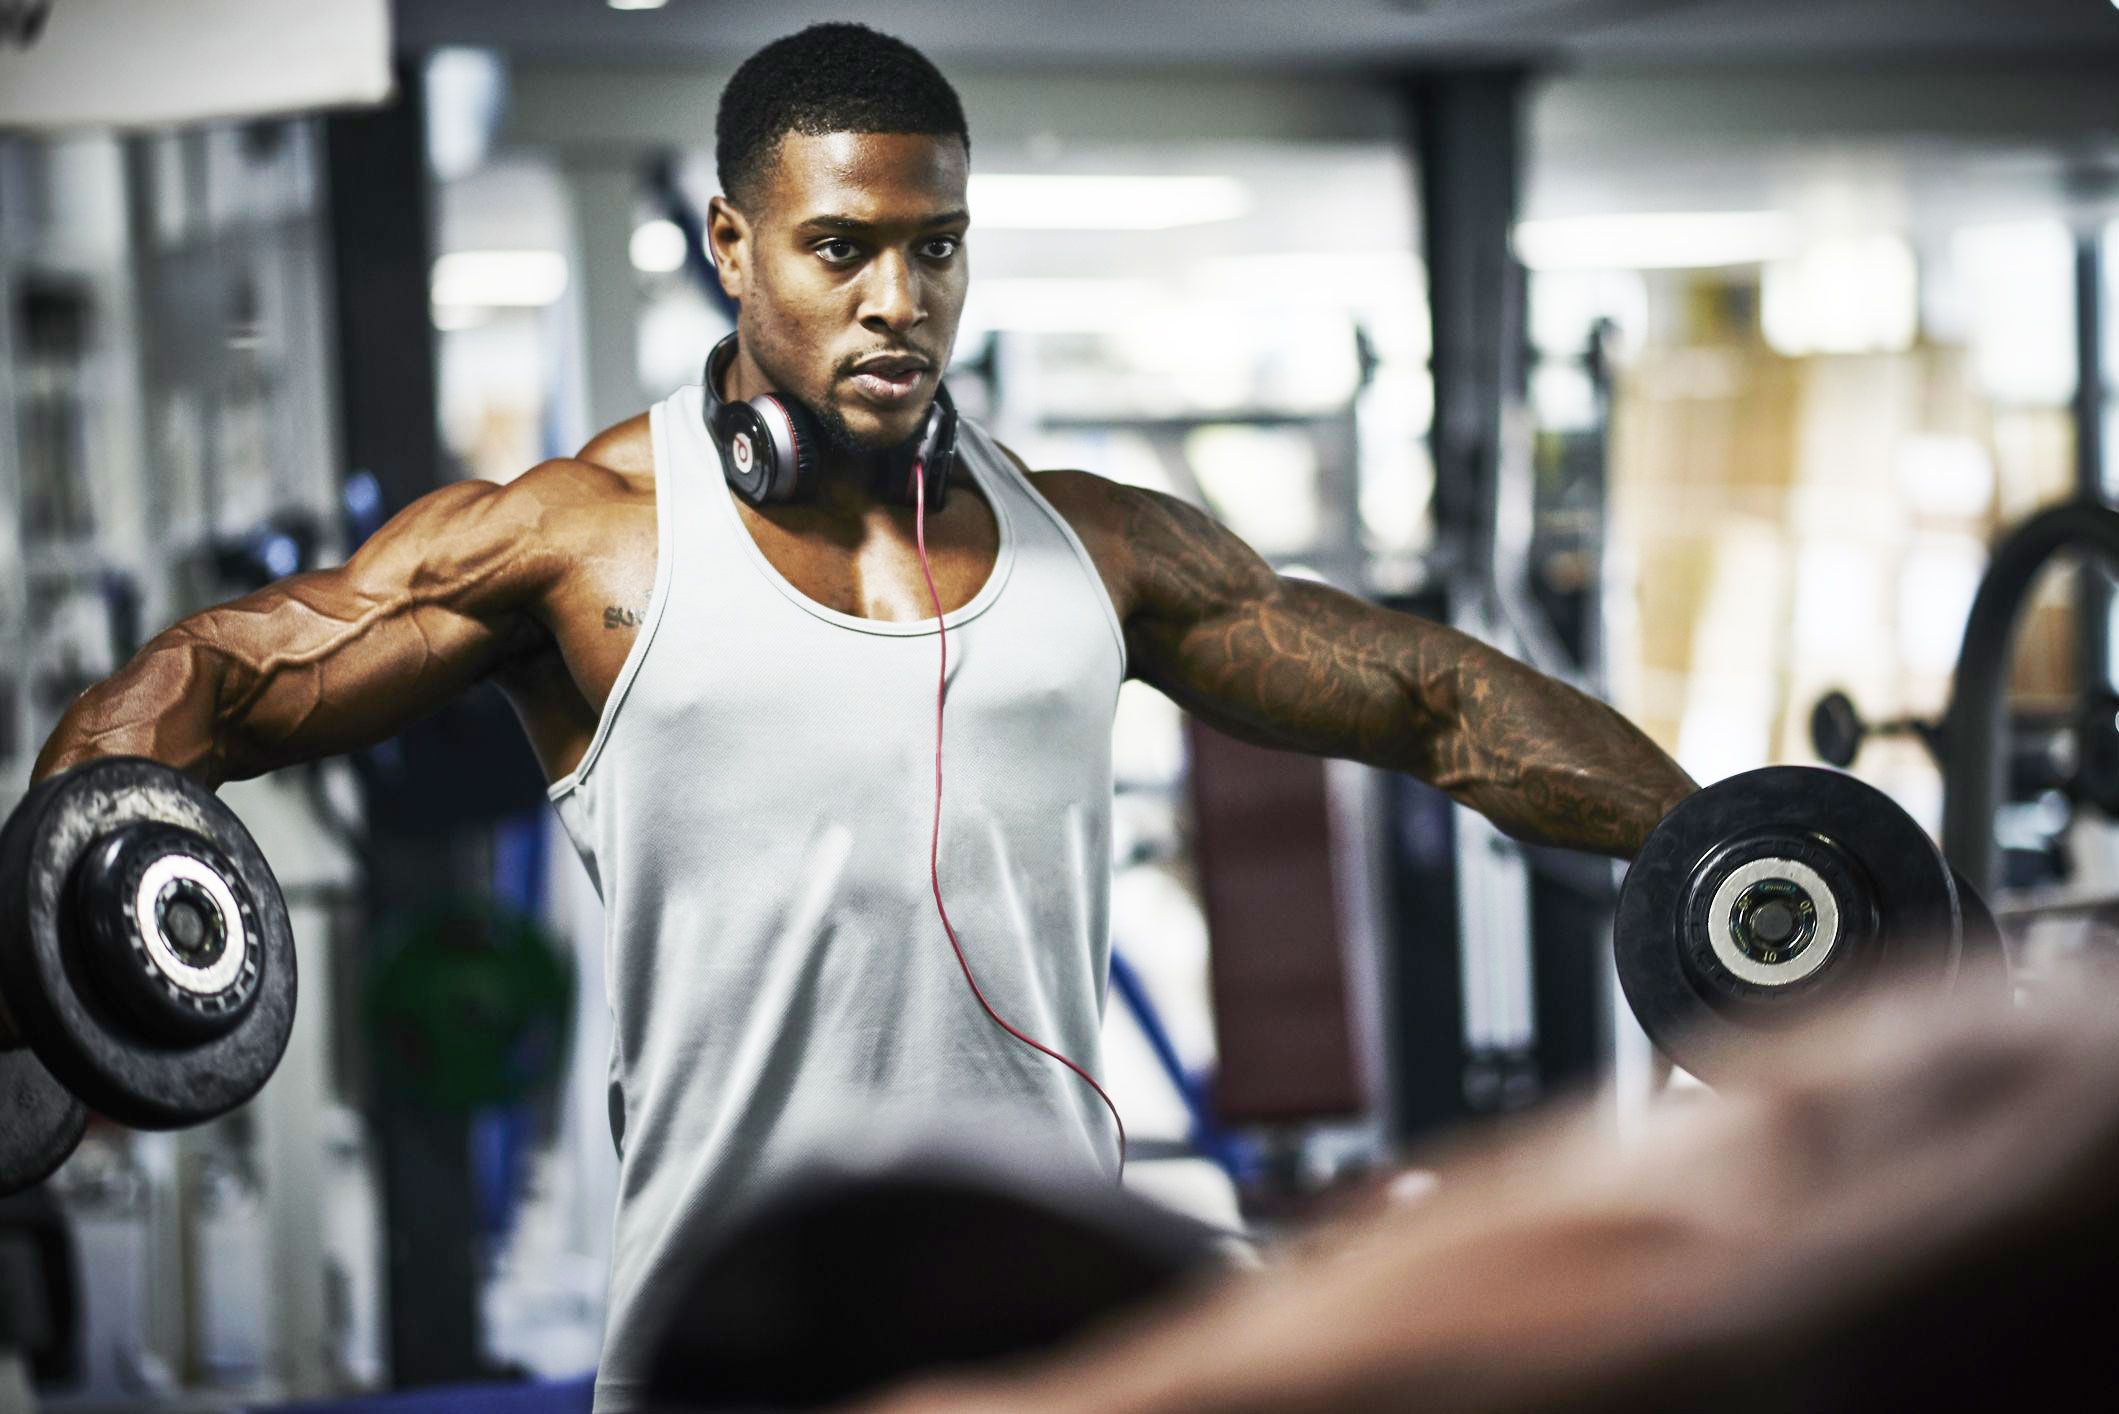 1 Hour Gym Work Out 2 x Per Week To Transform Your Body